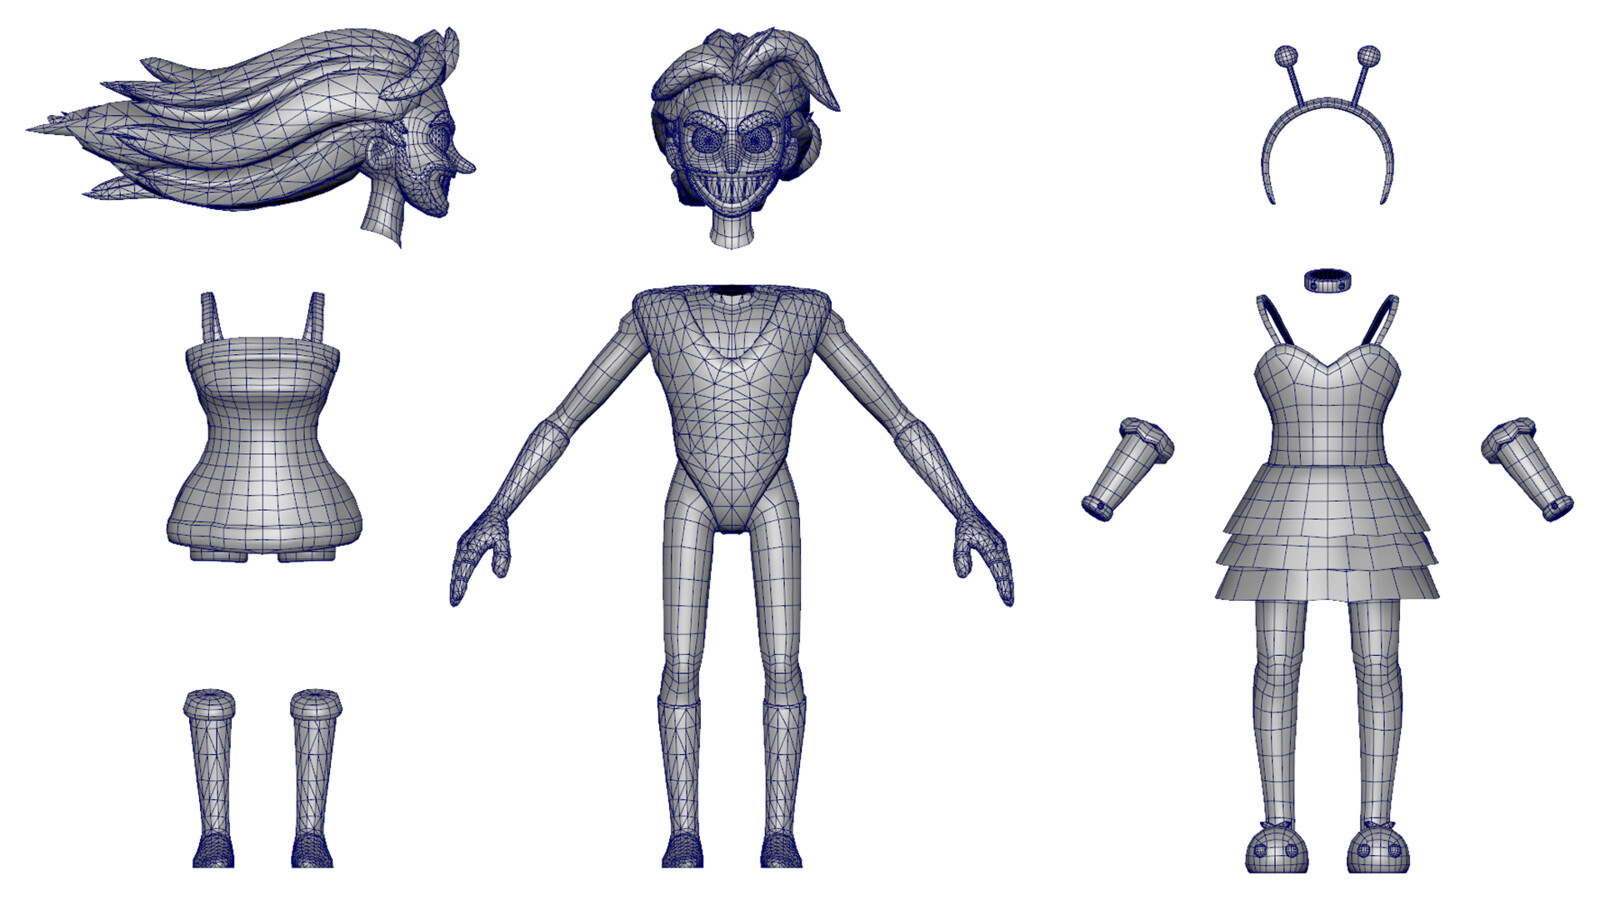 The final model is comprised of multiple meshes to allow for players to customize it's appearance.